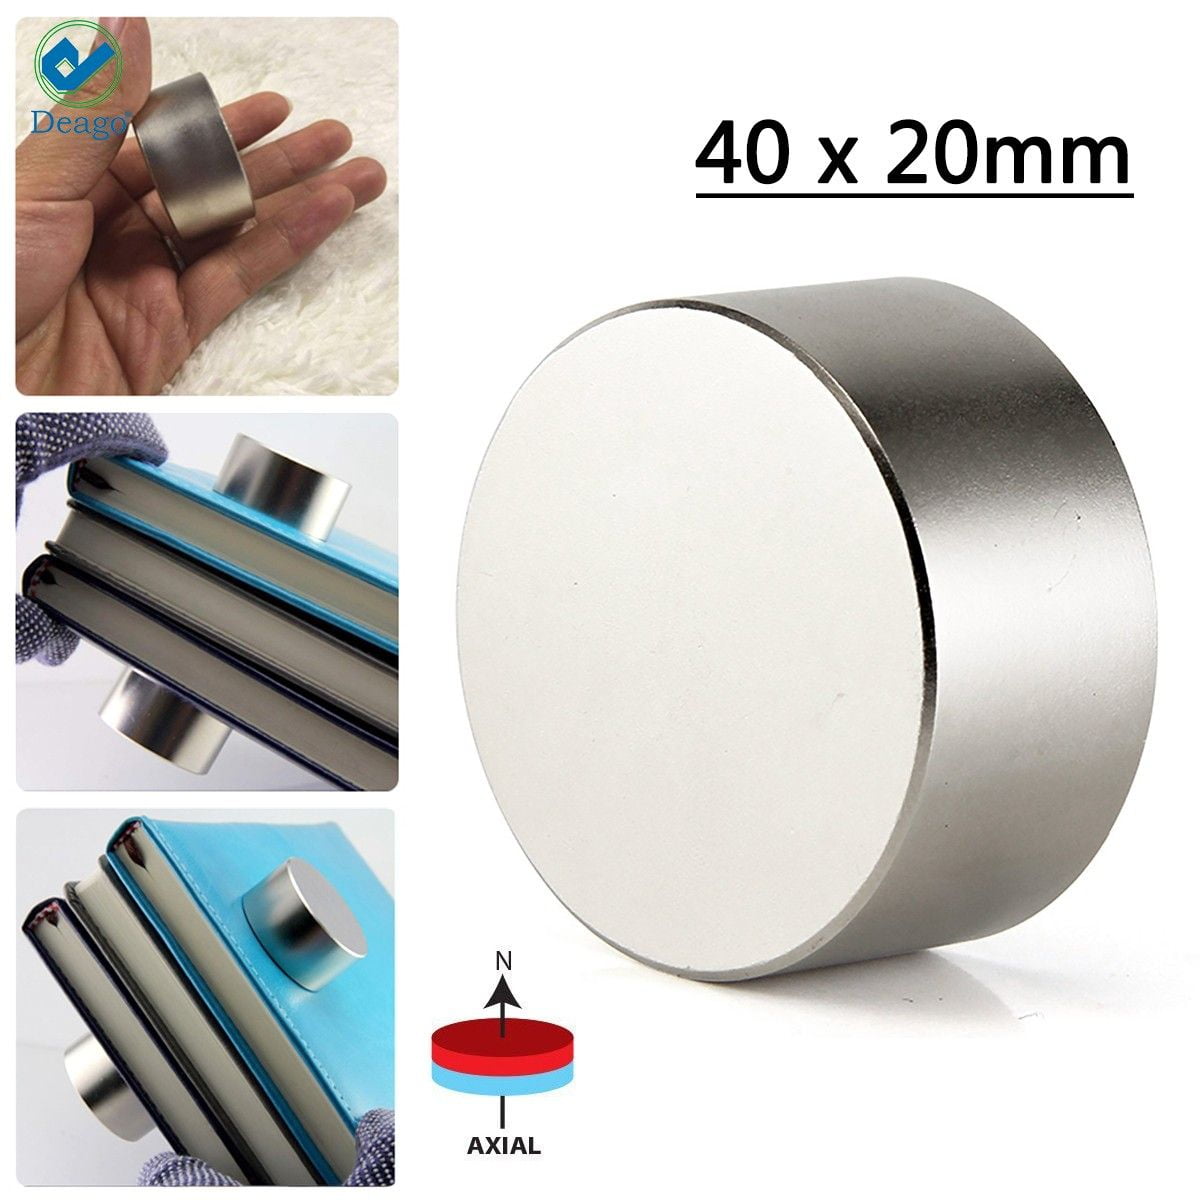 tak skal du have Undervisning Seaport Deago 40x20mm Super Strong Neodymium Rare Earth Disc Magnet, Permanent  Magnet Disc, N52 Most Powerful Round Magnets - One Piece - Walmart.com